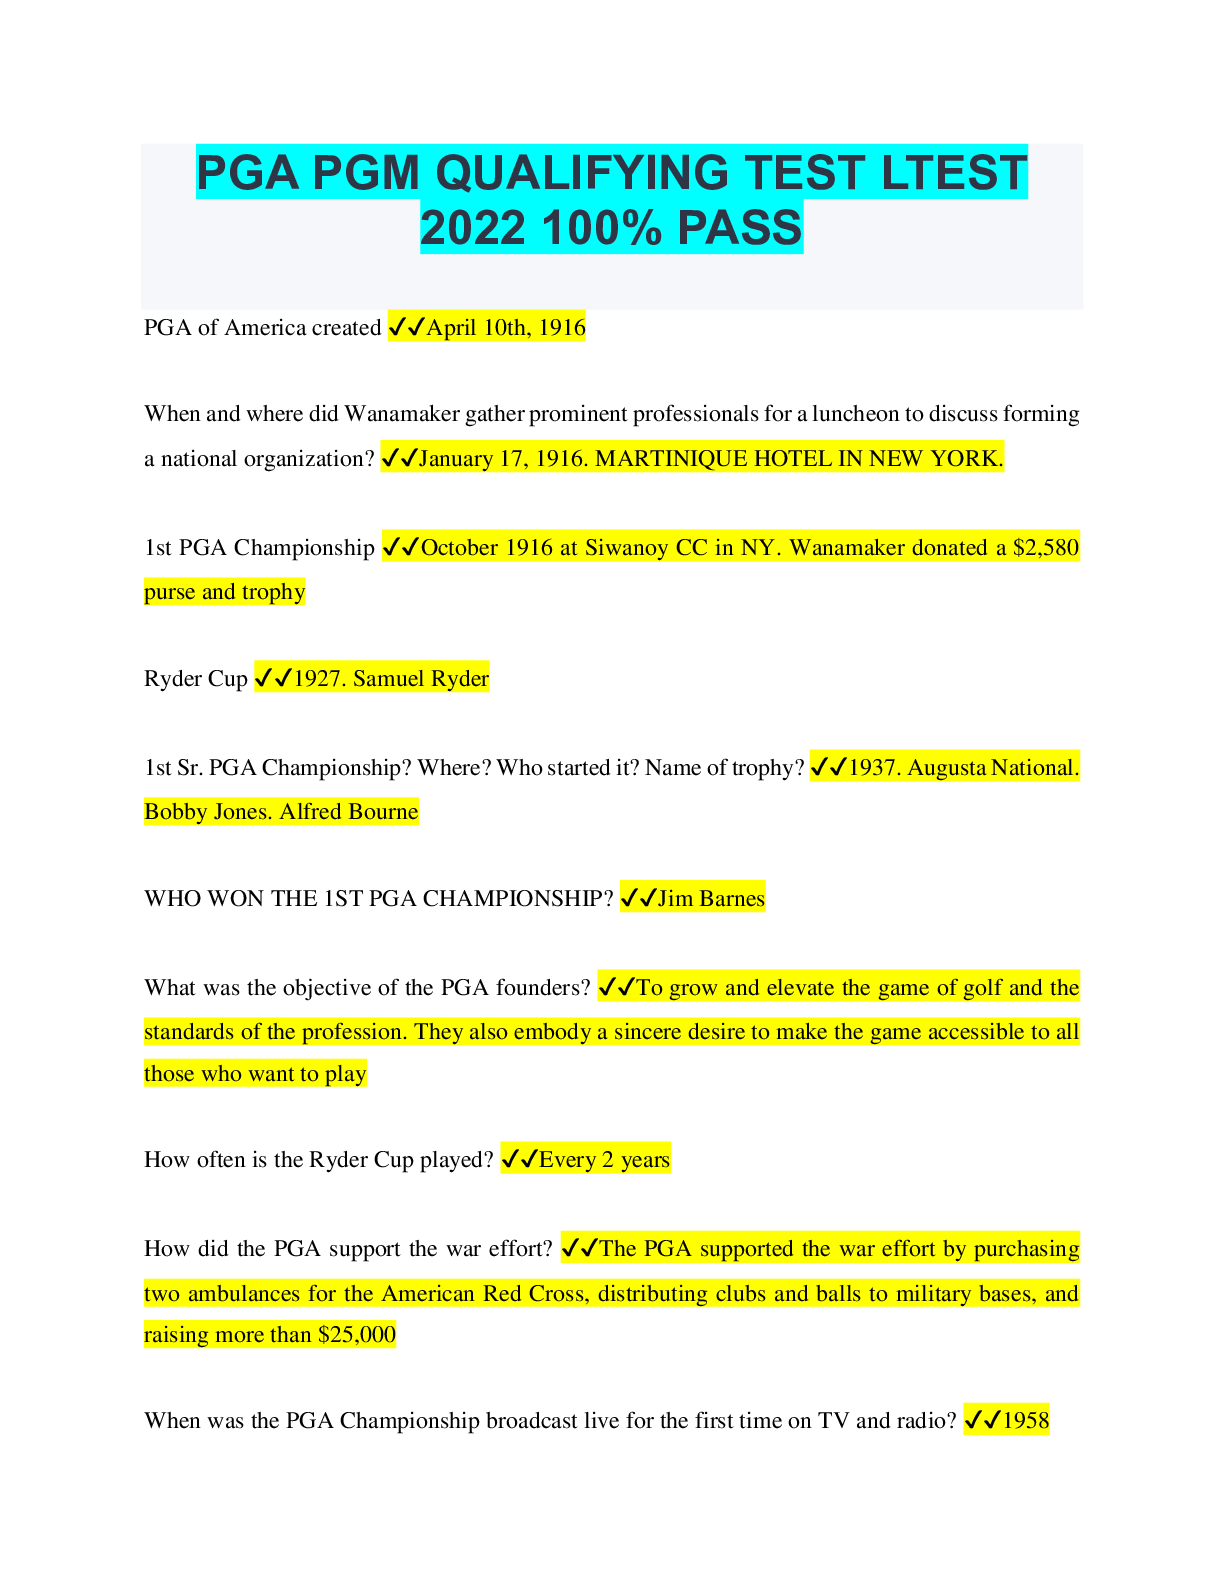 PGA PGM QUALIFYING TEST LTEST 2022 100% PASS - Browsegrades